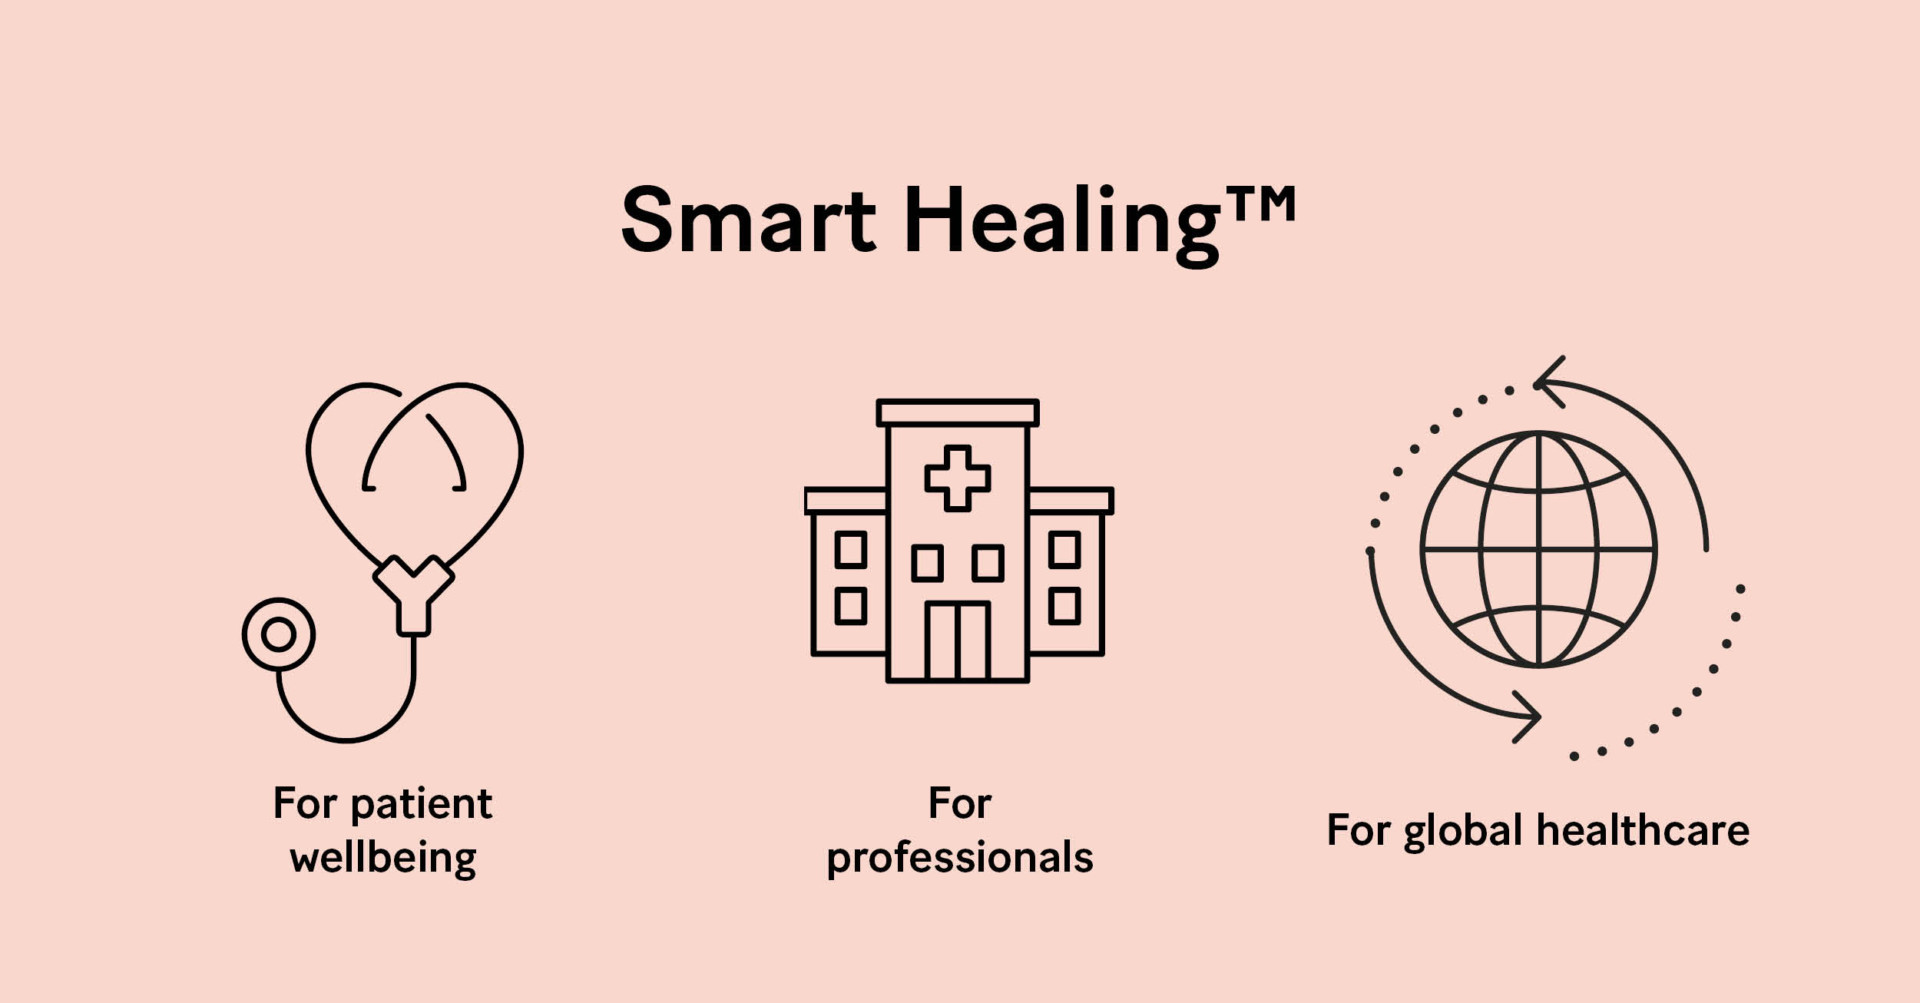 Smart Healing - Our Promise